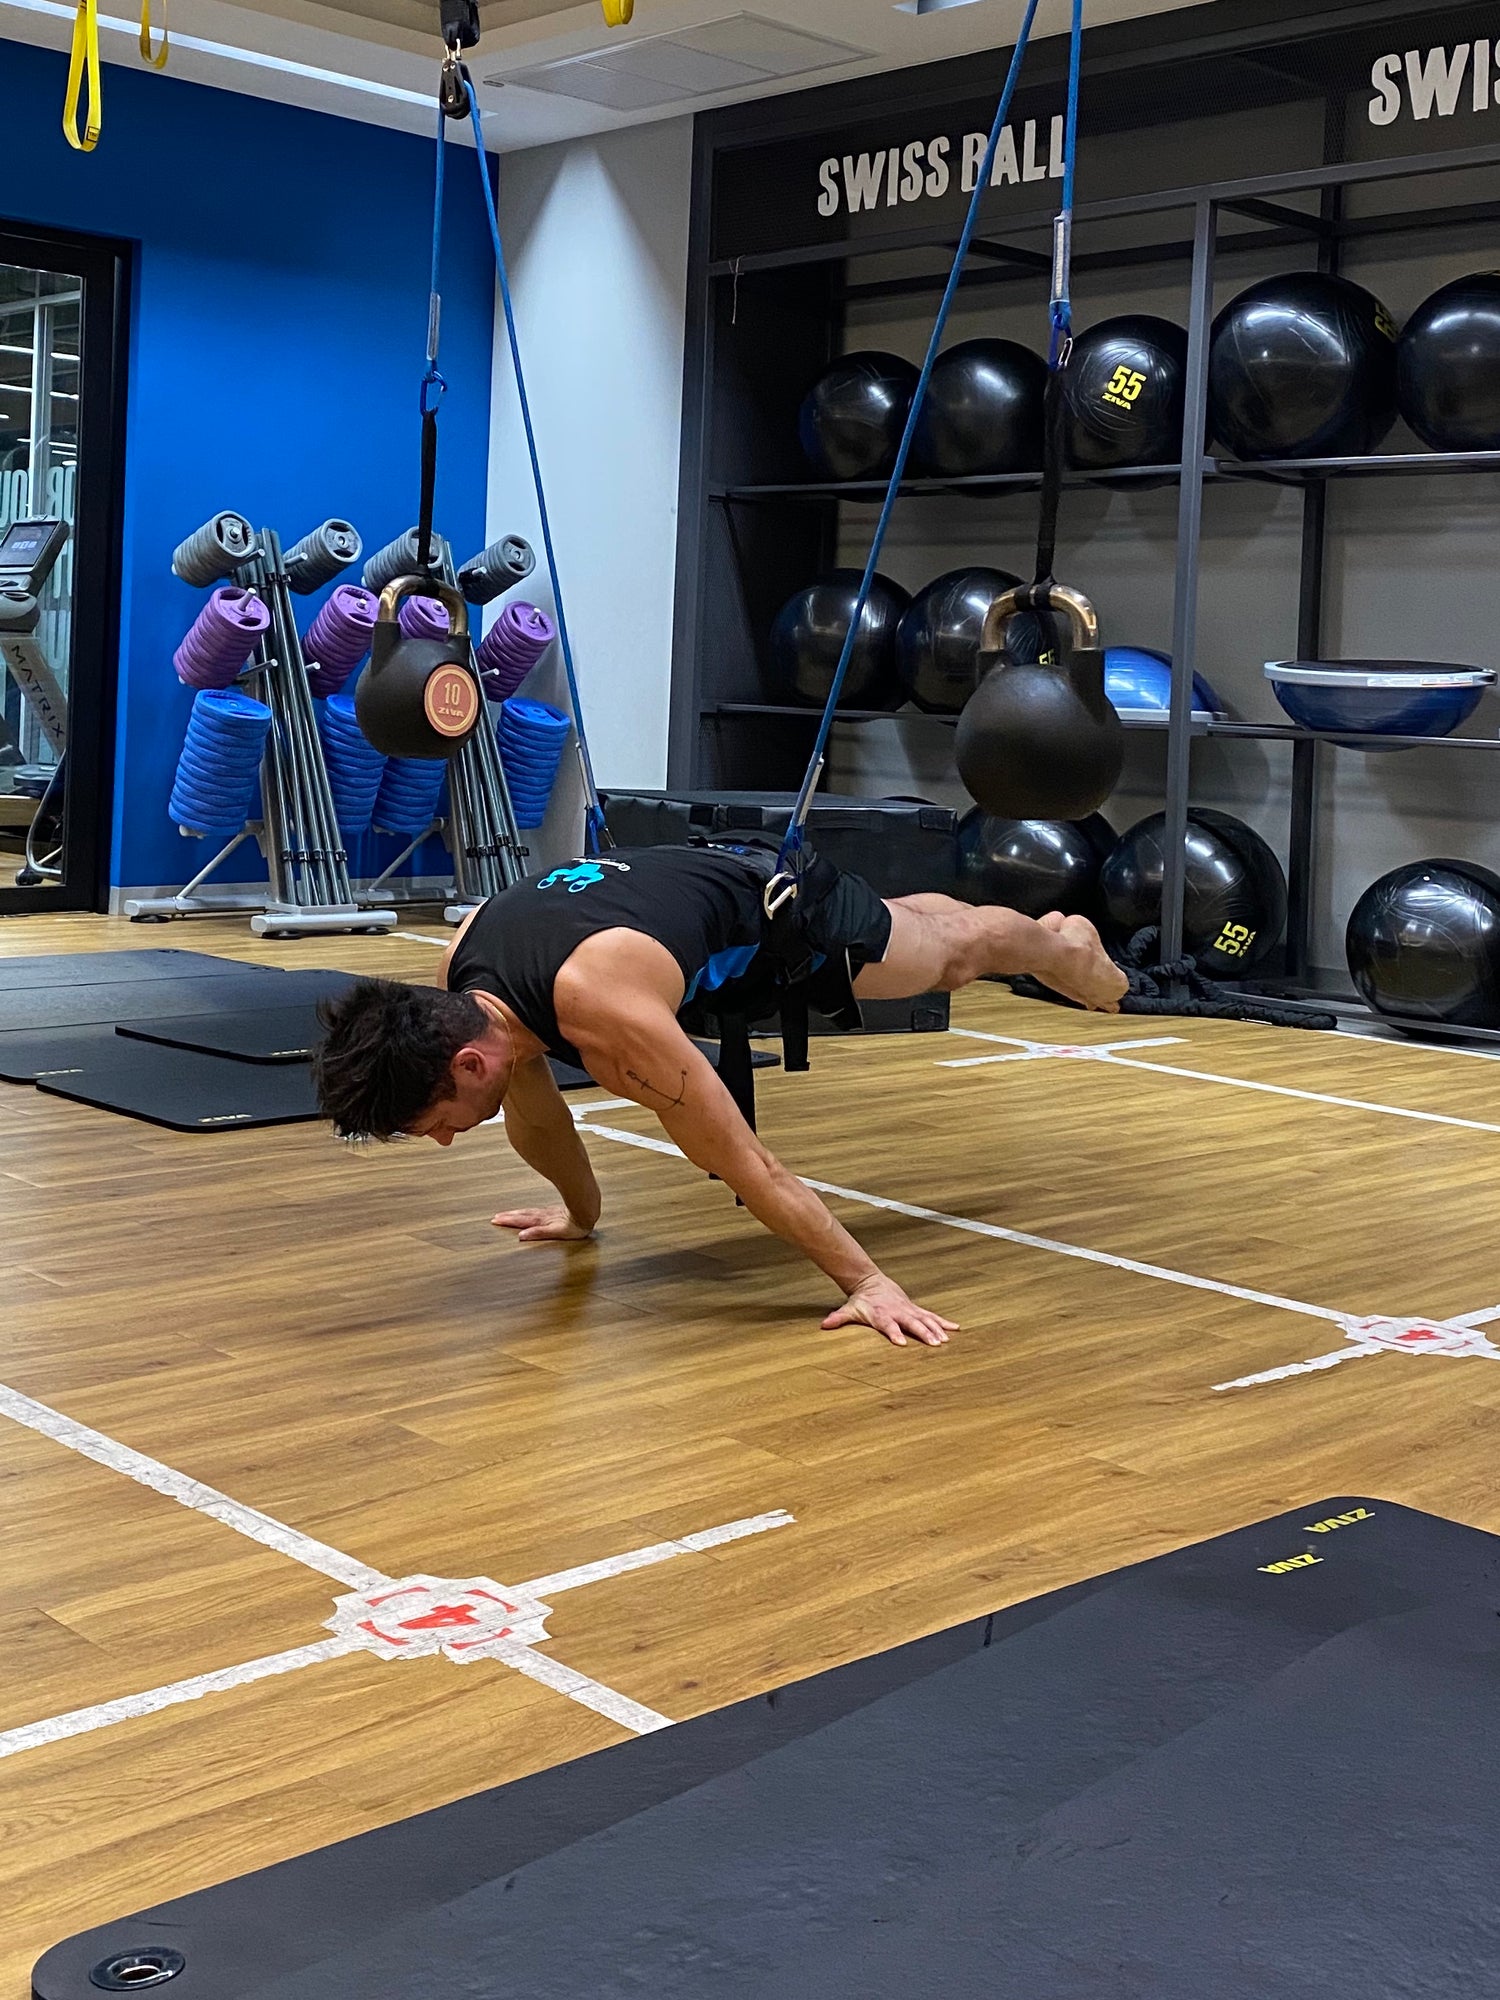 Load video: &lt;p&gt;It is also possible to learn skills directly on the ground in this training mode, fully simulating any calisthenics movement. It may also be used to practice simple exercises like push-ups.&lt;/p&gt;